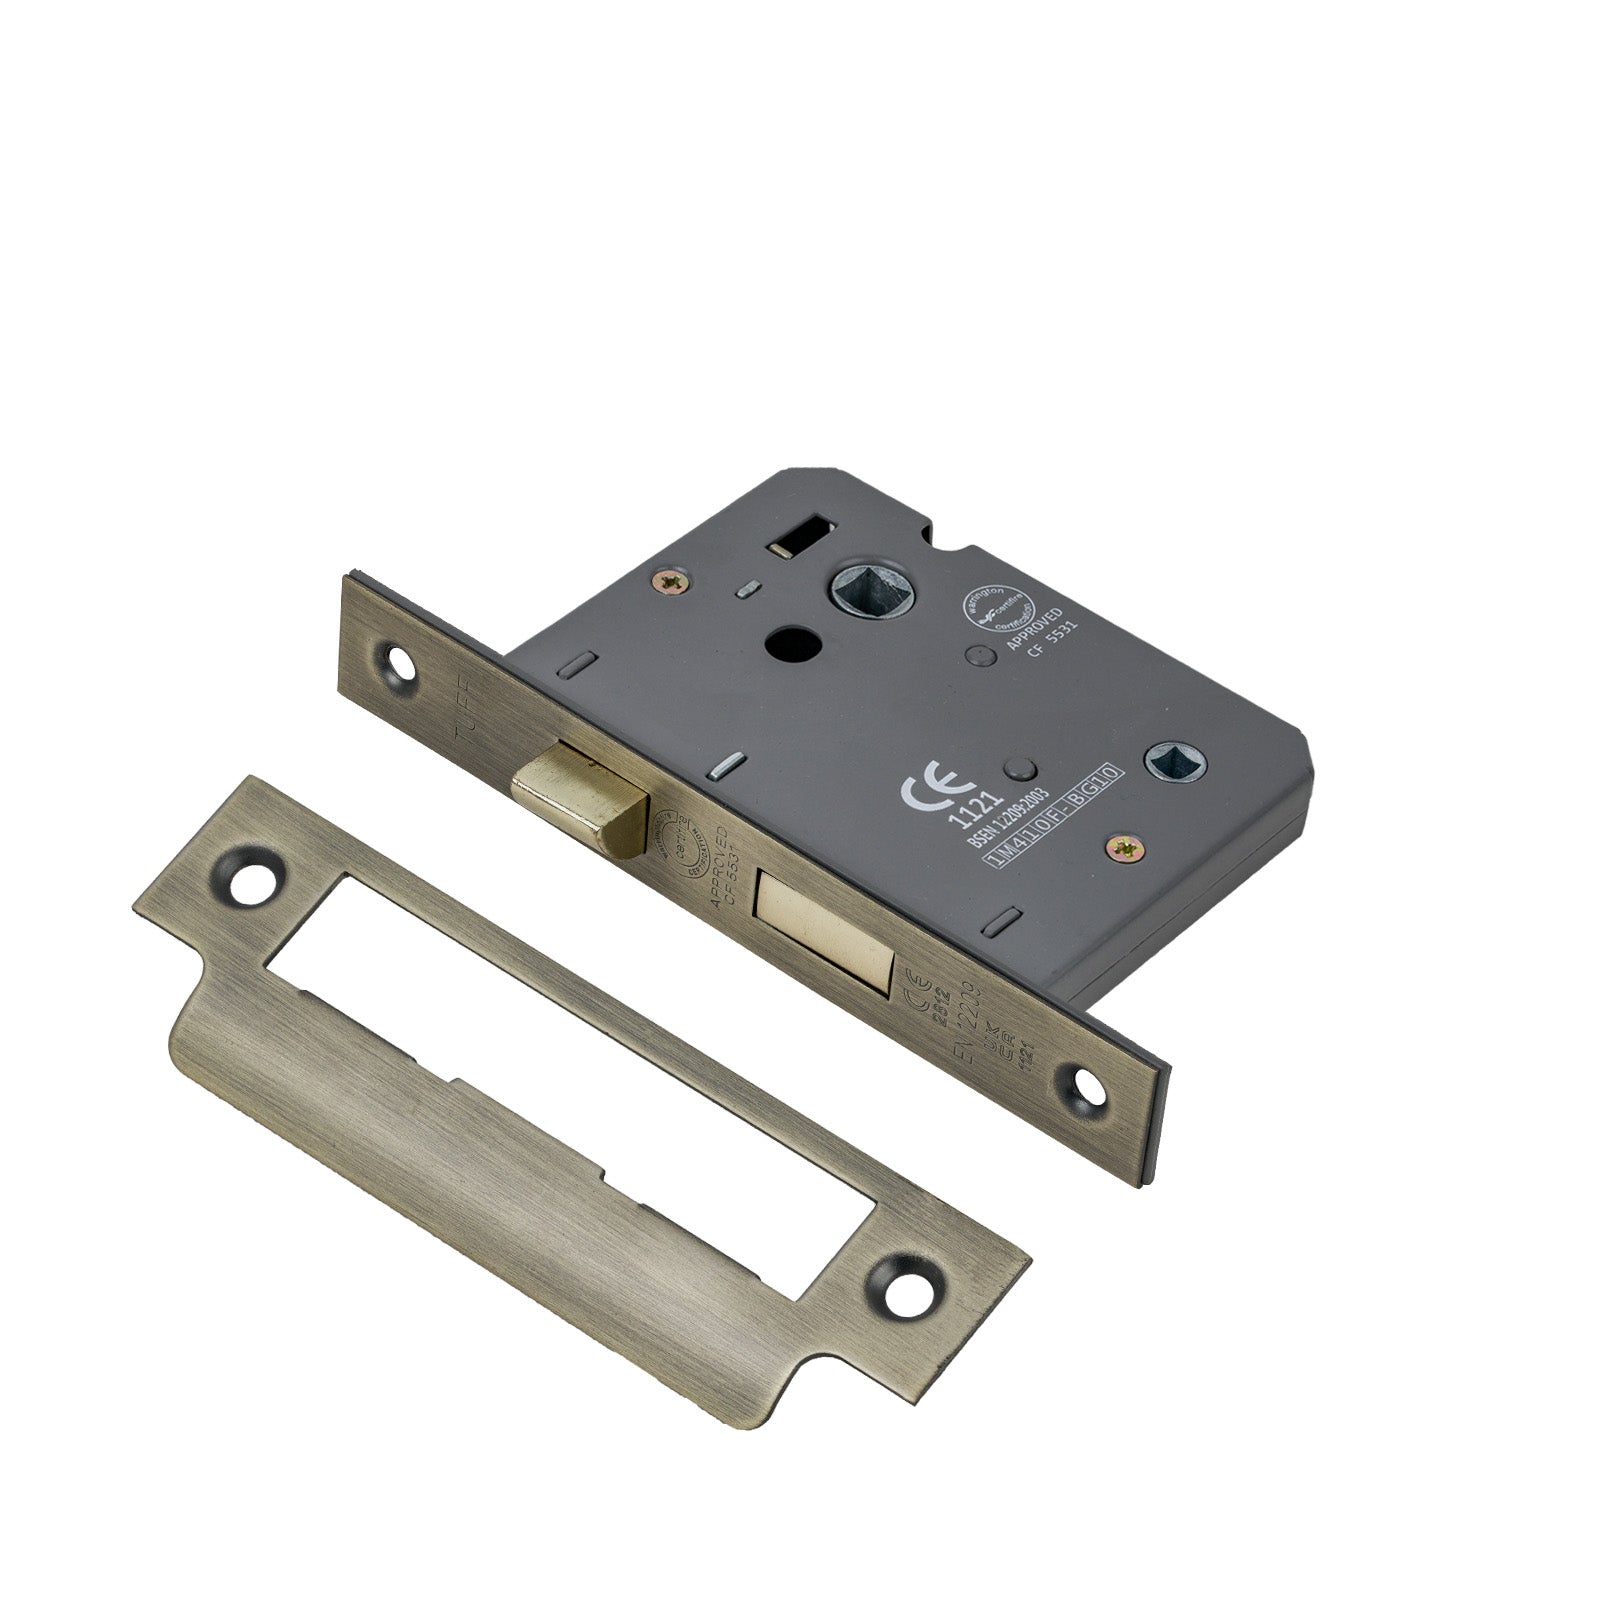 SHOW Bathroom Sash Lock - 3 Inch with Matt Antique Brass finished forend and striker plate